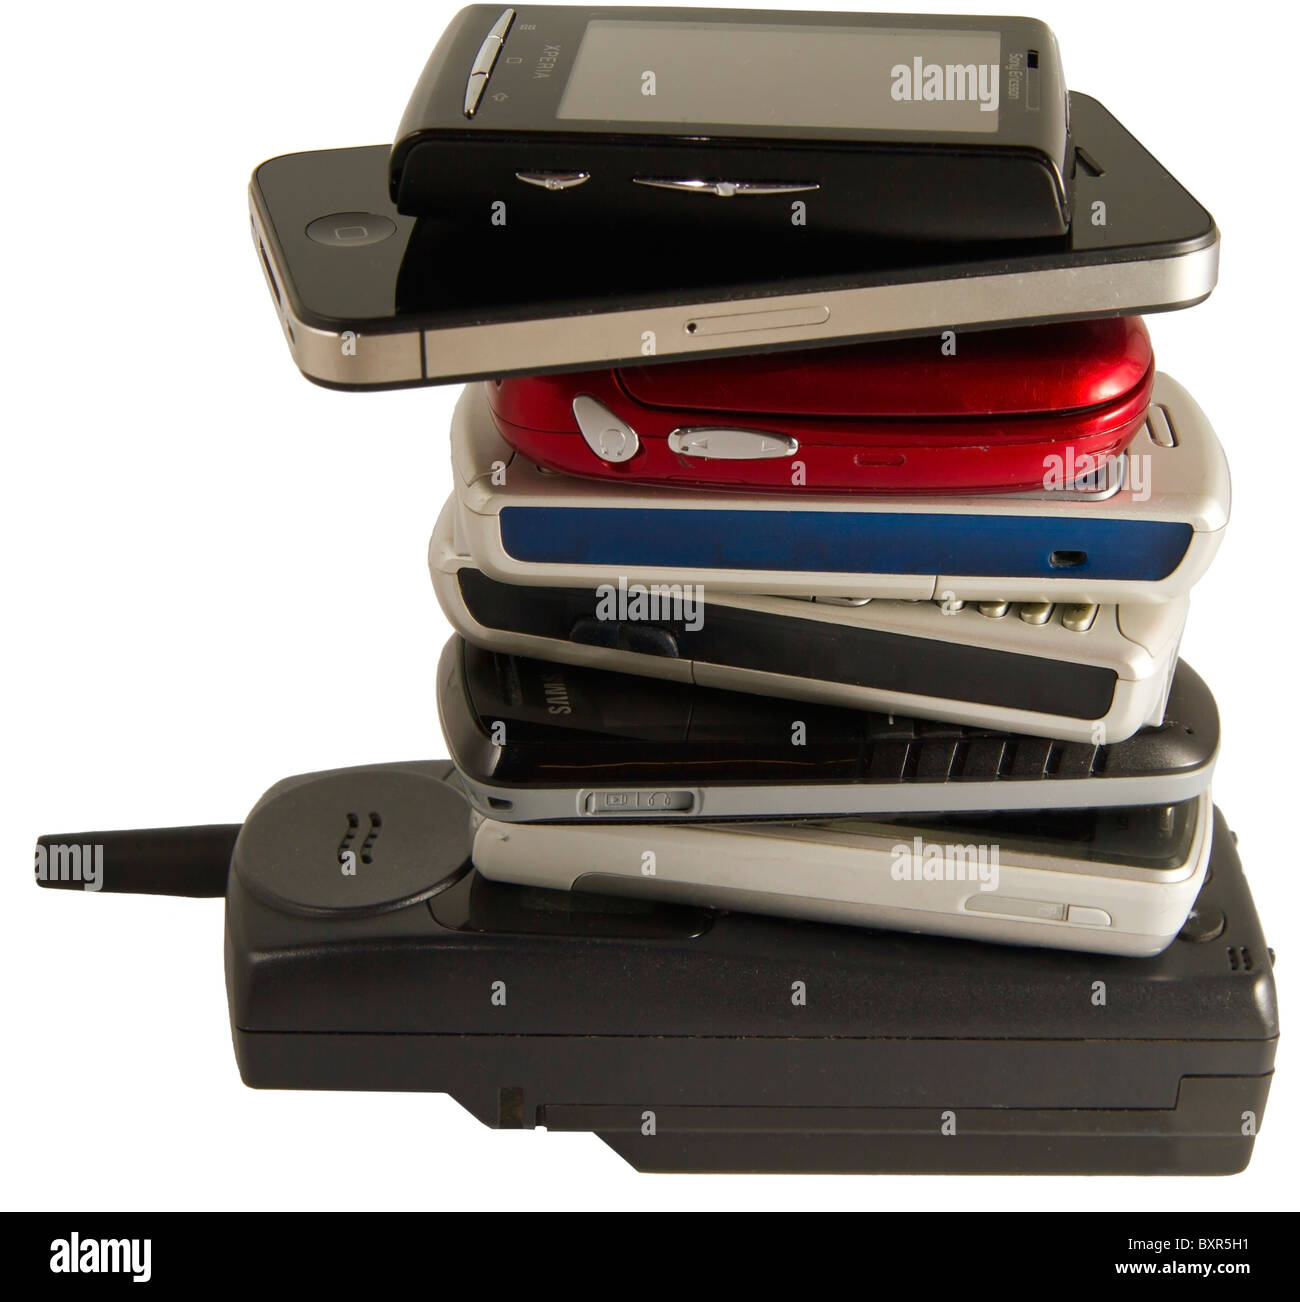 Pile of old and new mobile phones on white background. Phone on top is the Sony Ericsson Xperia X10 mini. Second one is iPhone 4 Stock Photo